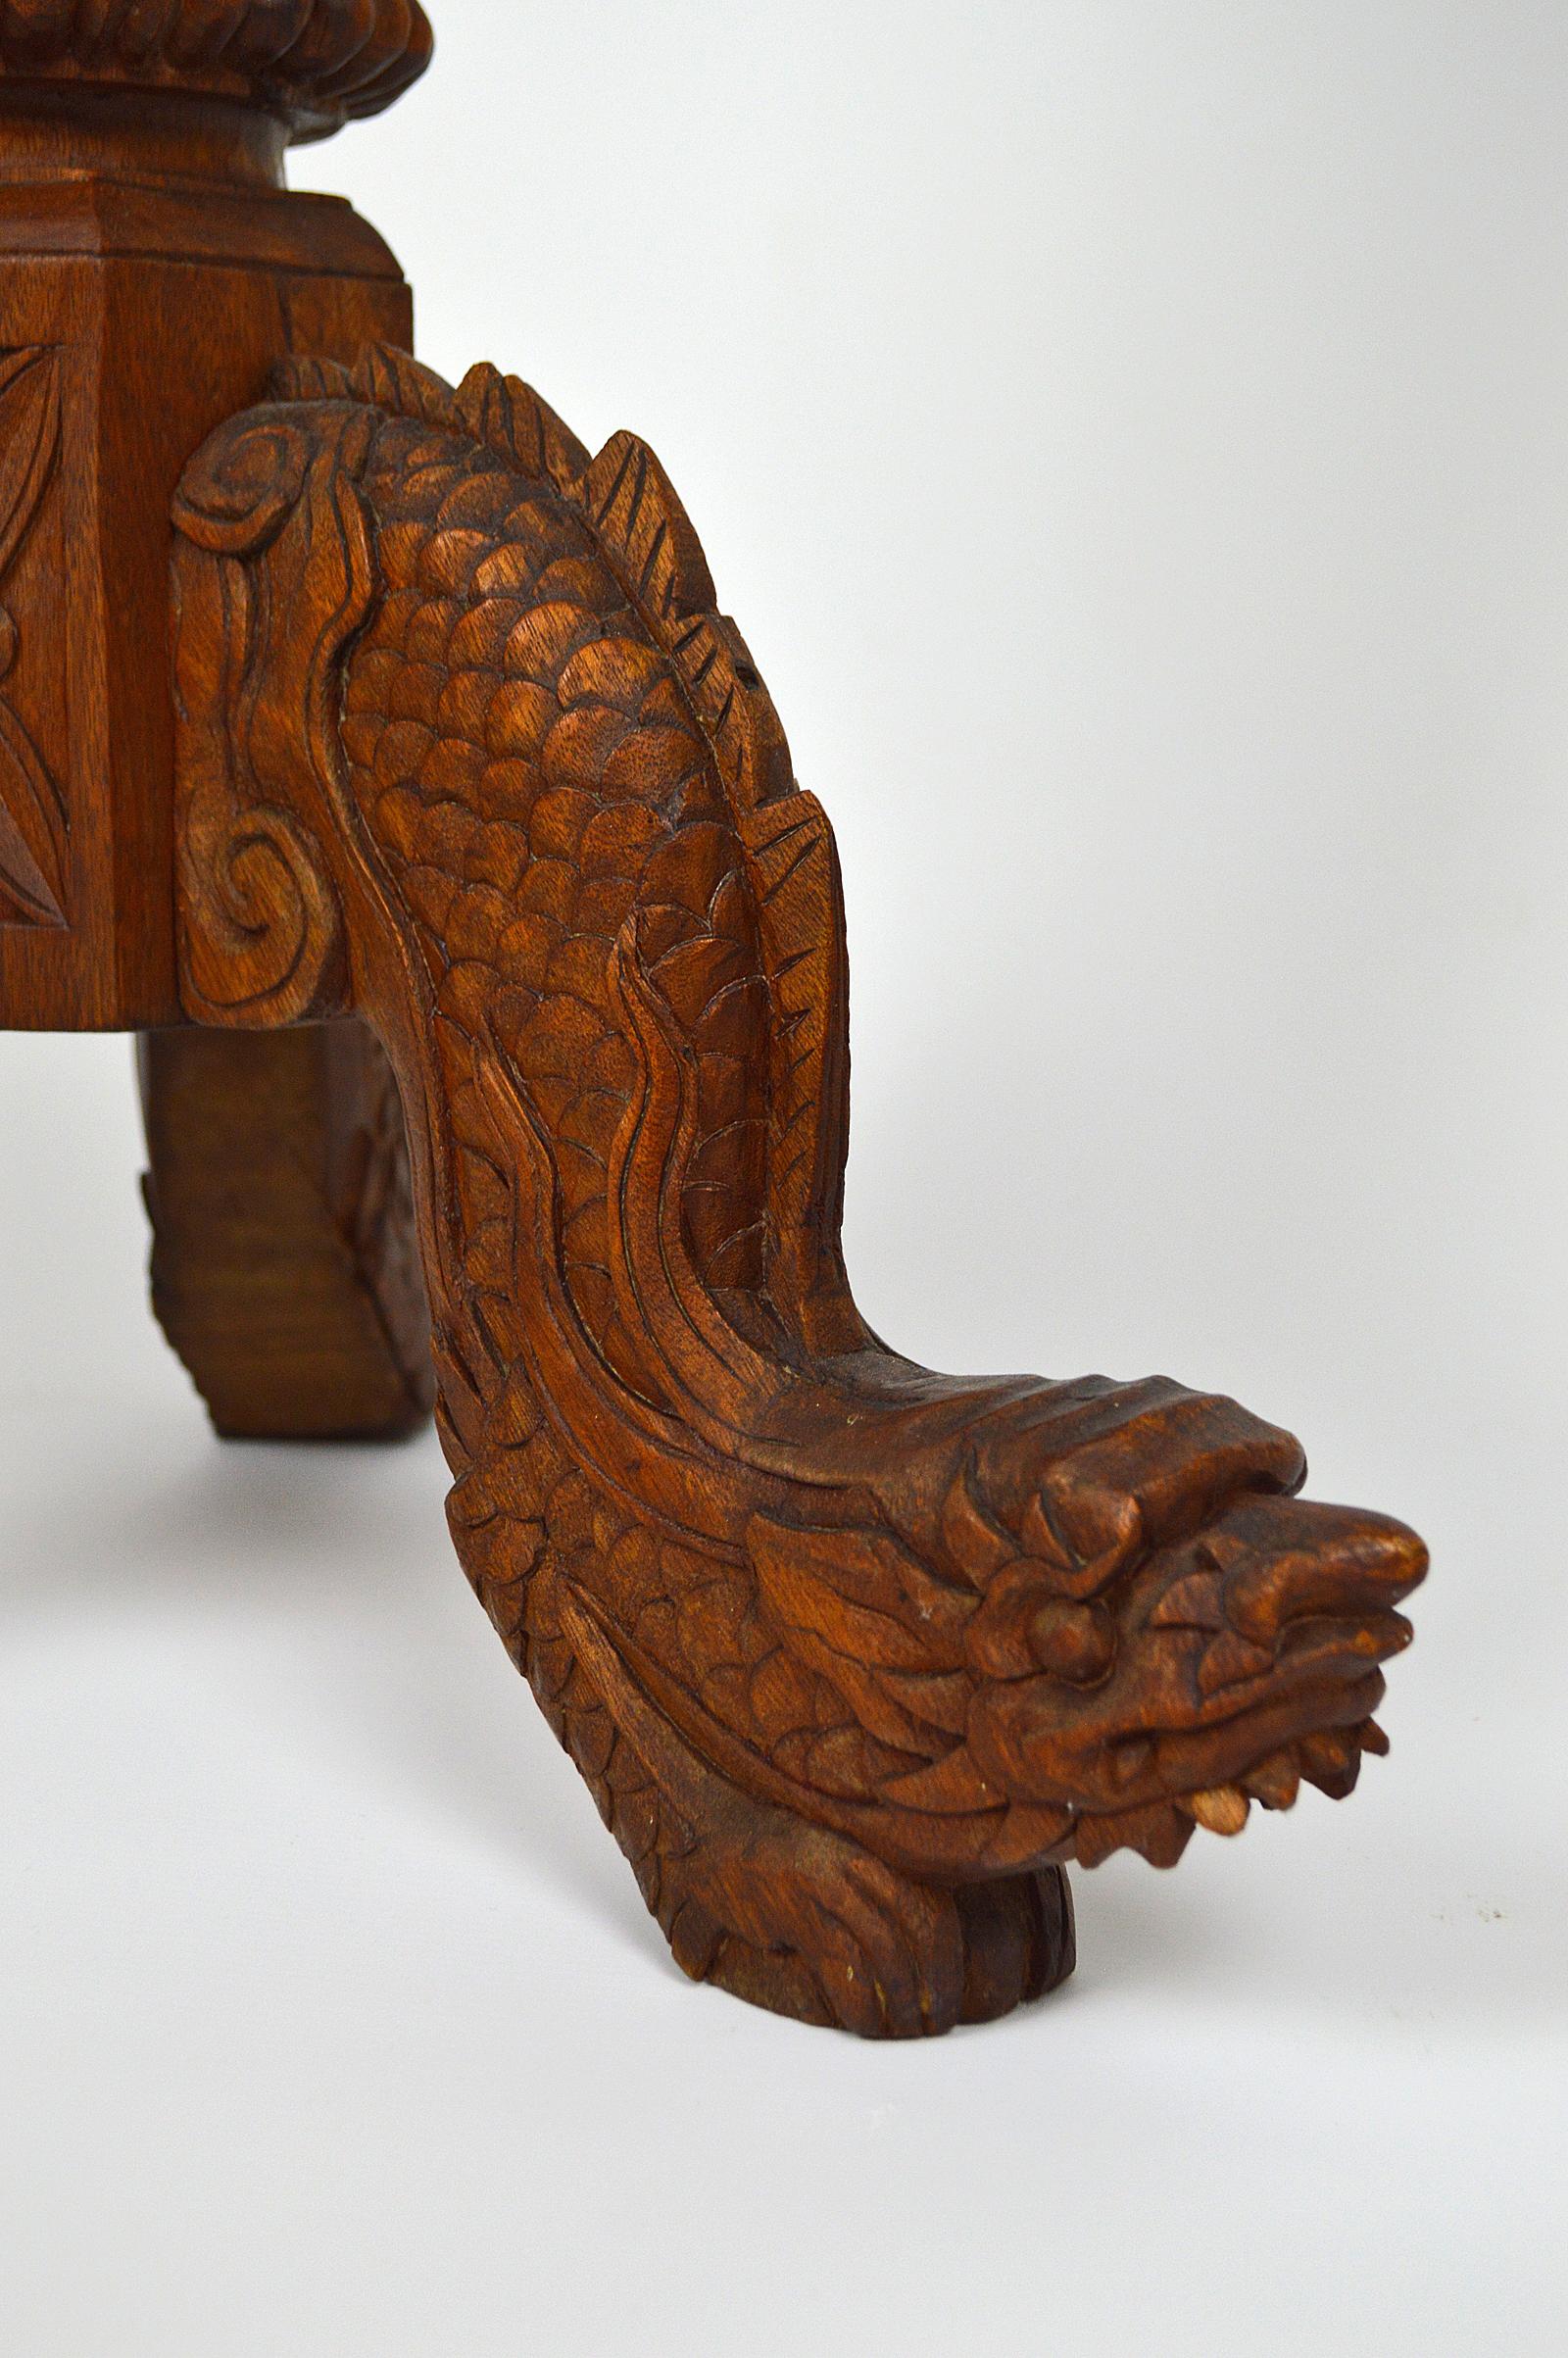 Asian Pedestal Table in Carved Wood on a Mythological Theme, circa 1890 For Sale 7